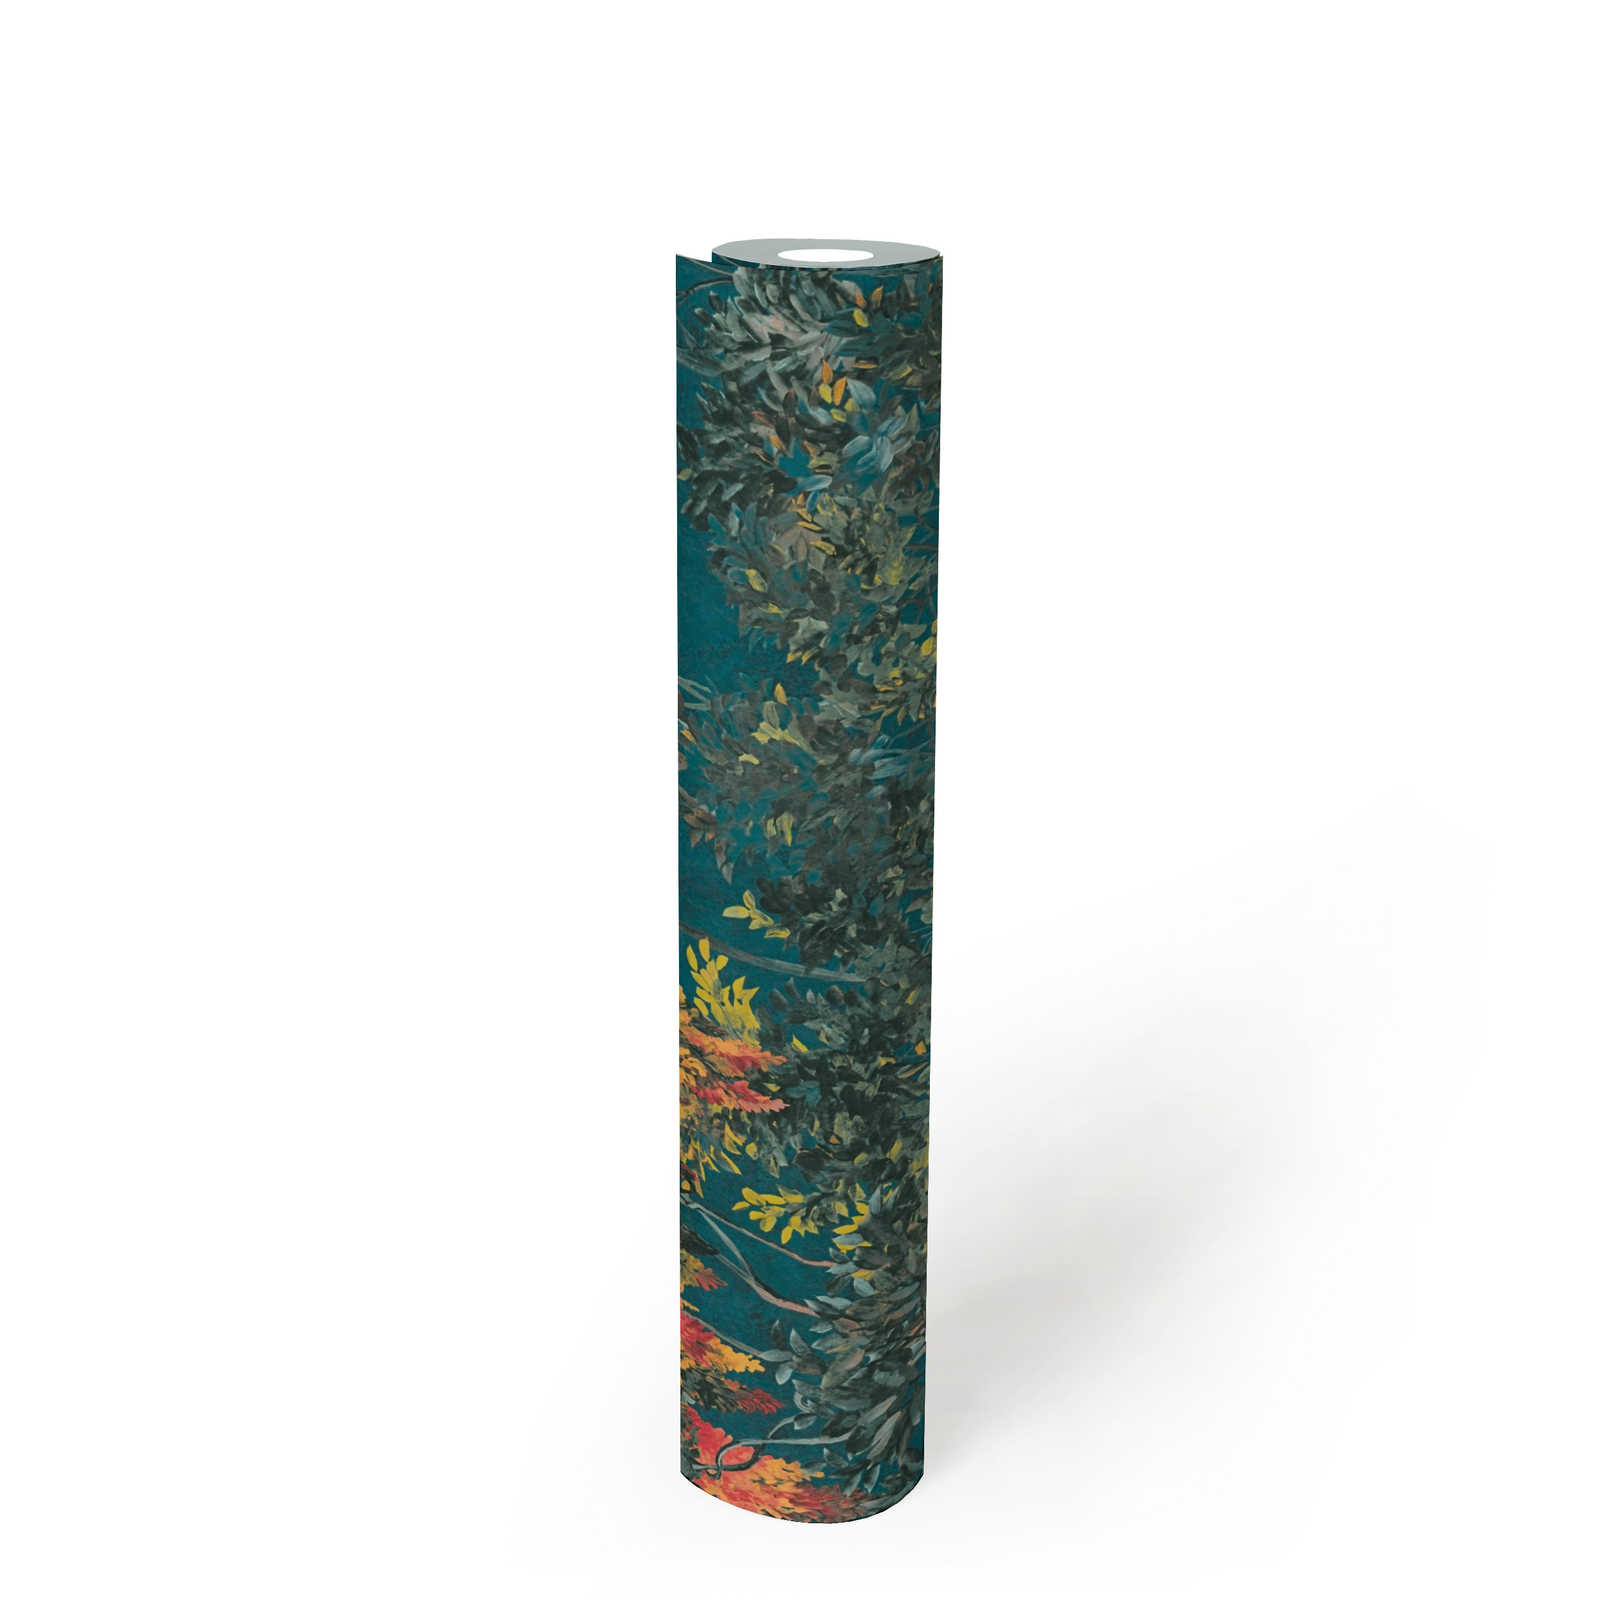             Jungle wallpaper with colourful pattern - multicoloured, petrol, yellow
        